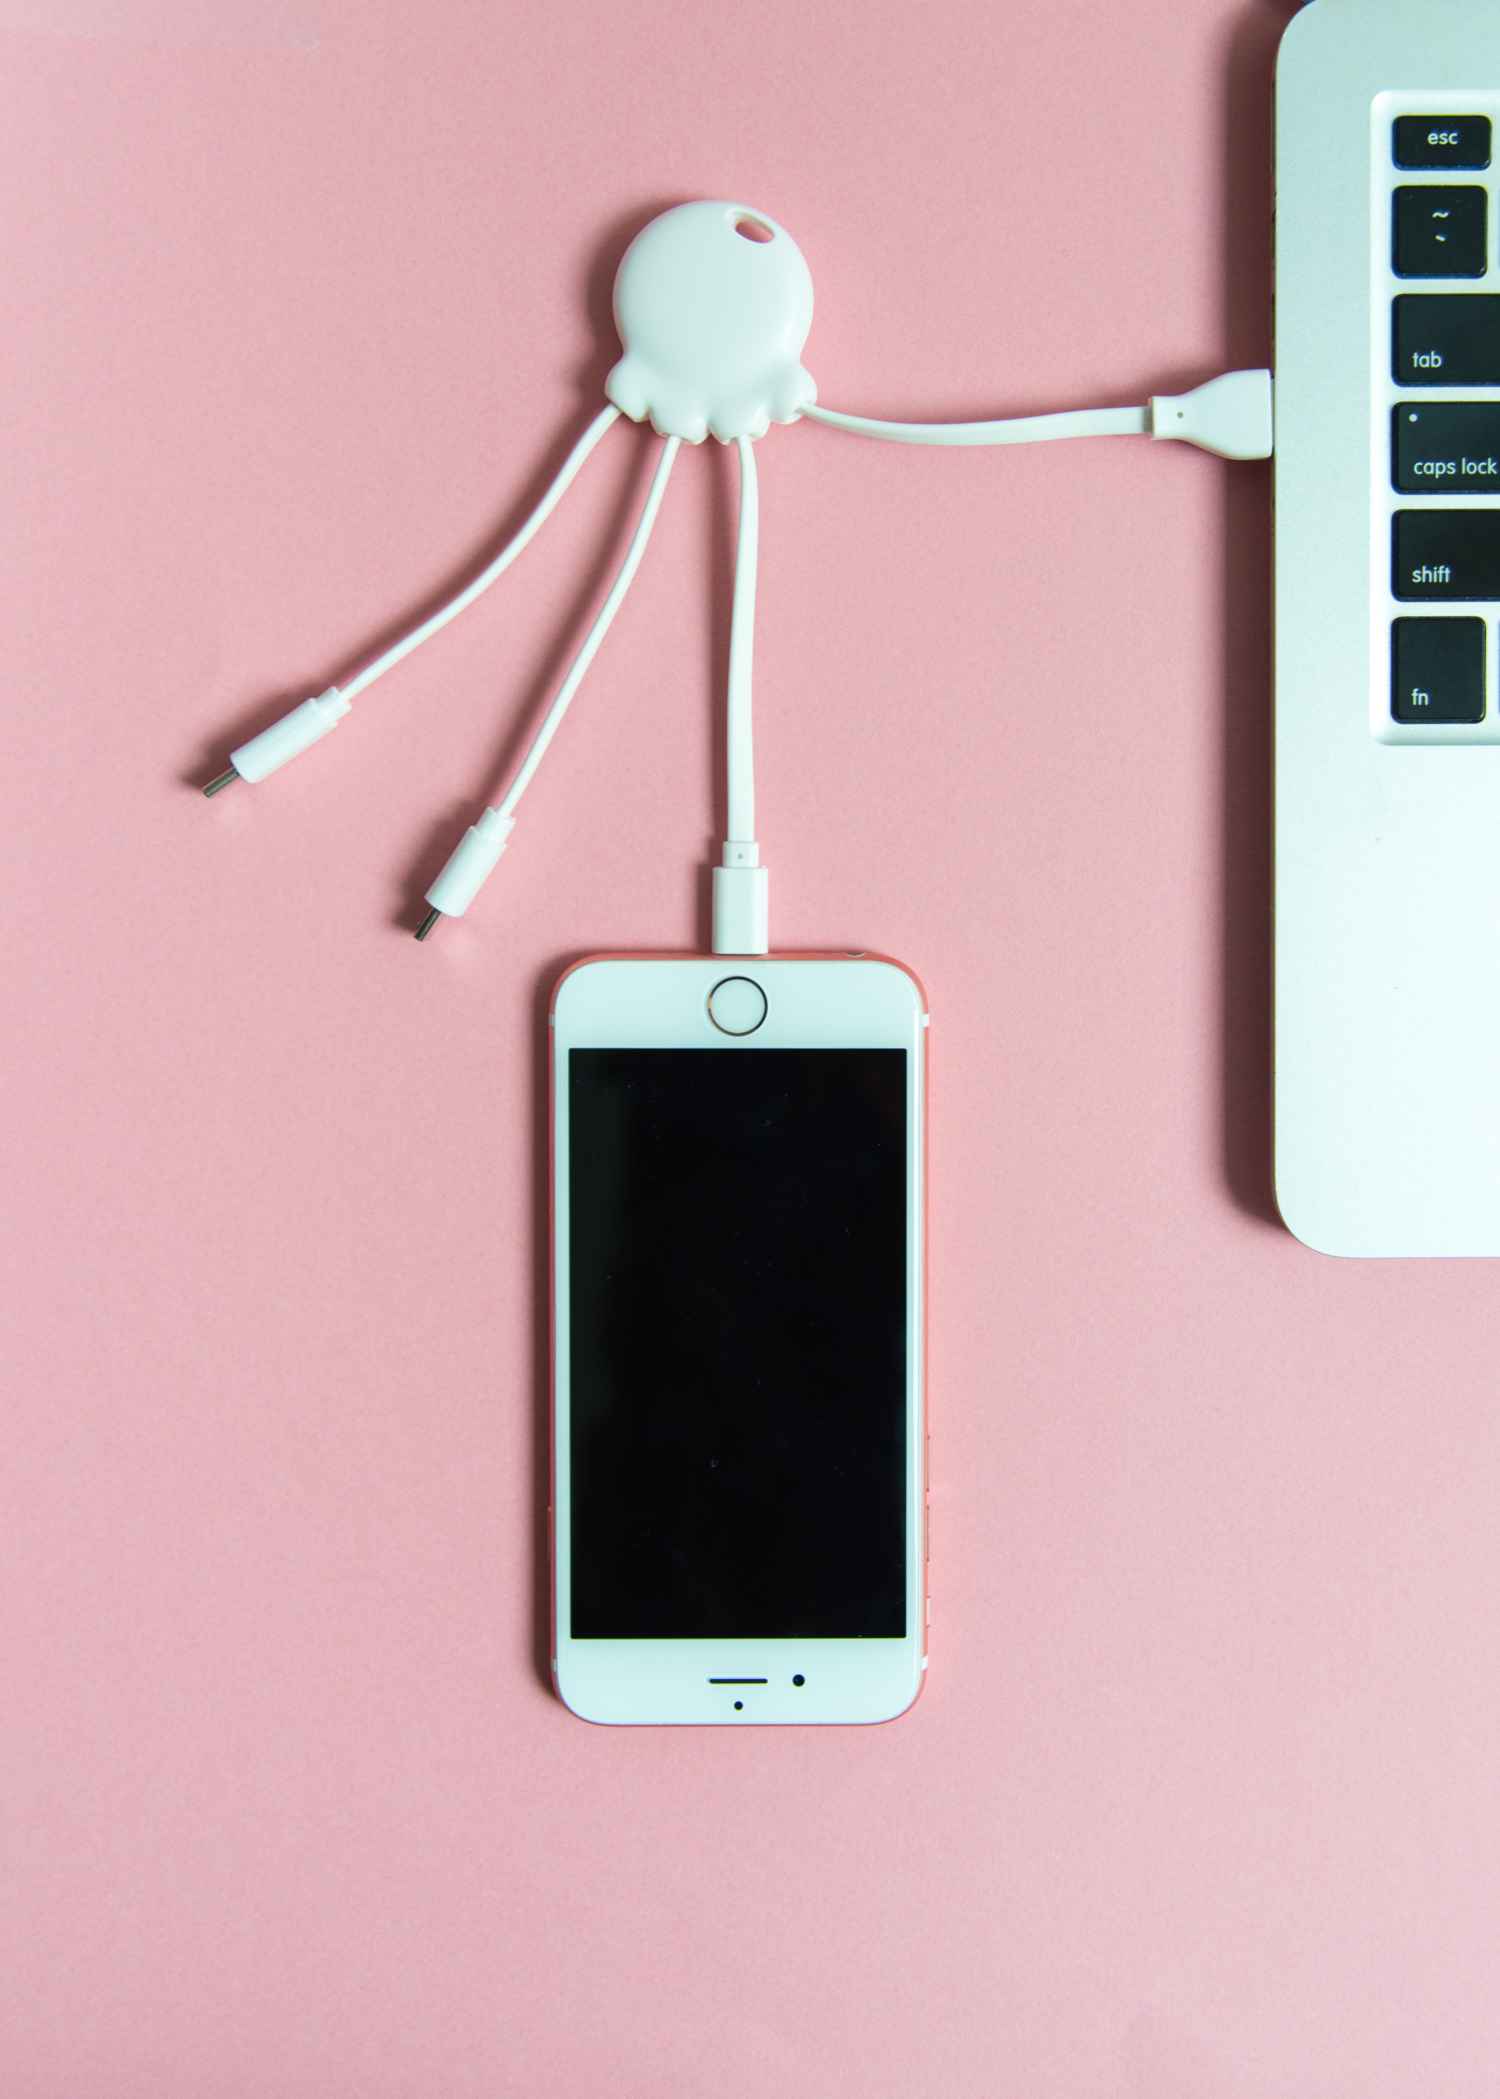 A muilti-cord adaptor can keep your business online